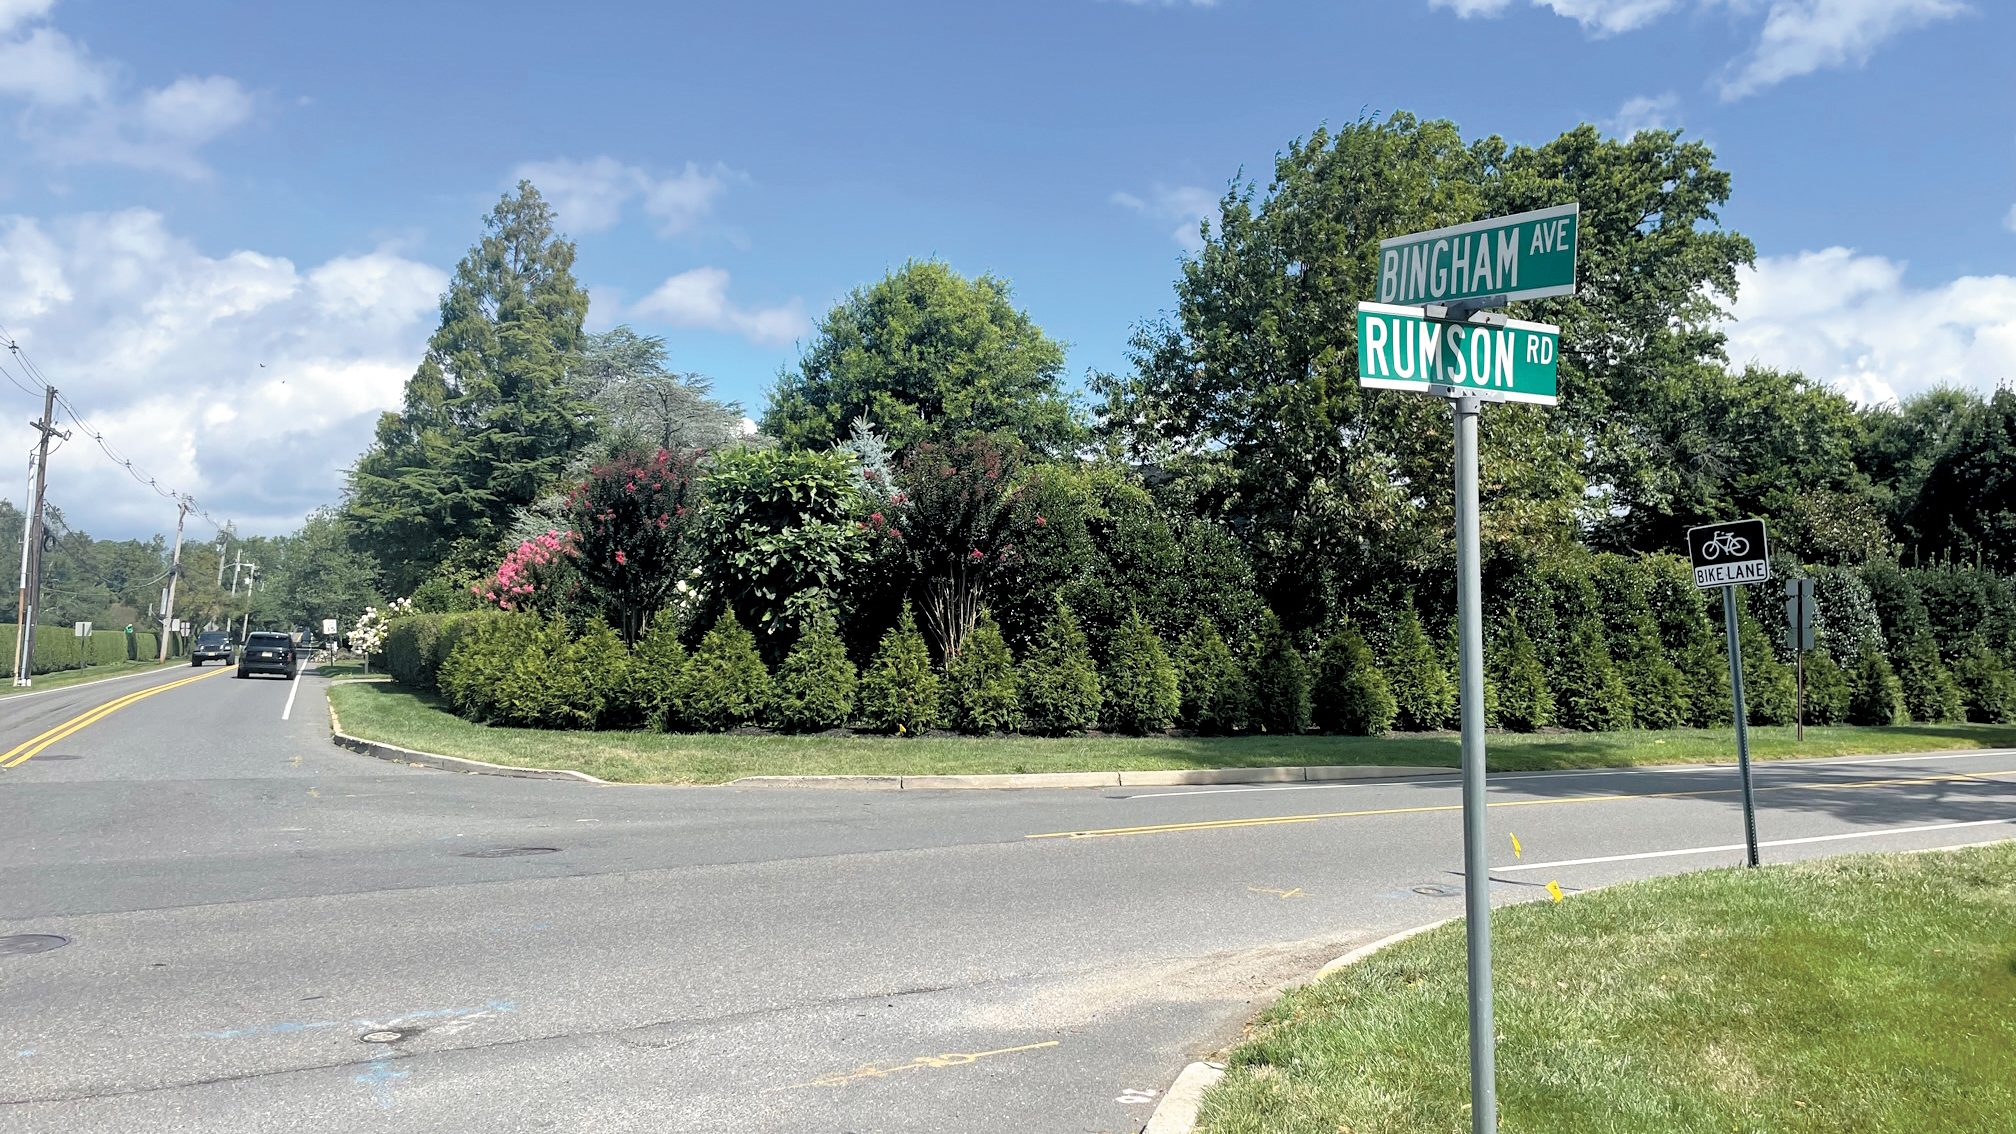 Rumson Road and Bingham Avenue are both county roads, so amending speed limits or installing a traffic light would require the borough submit a formal request for a traffic study to the county. Ultimately, any decision related to these roadways is up to the county. Stephen Appezzato